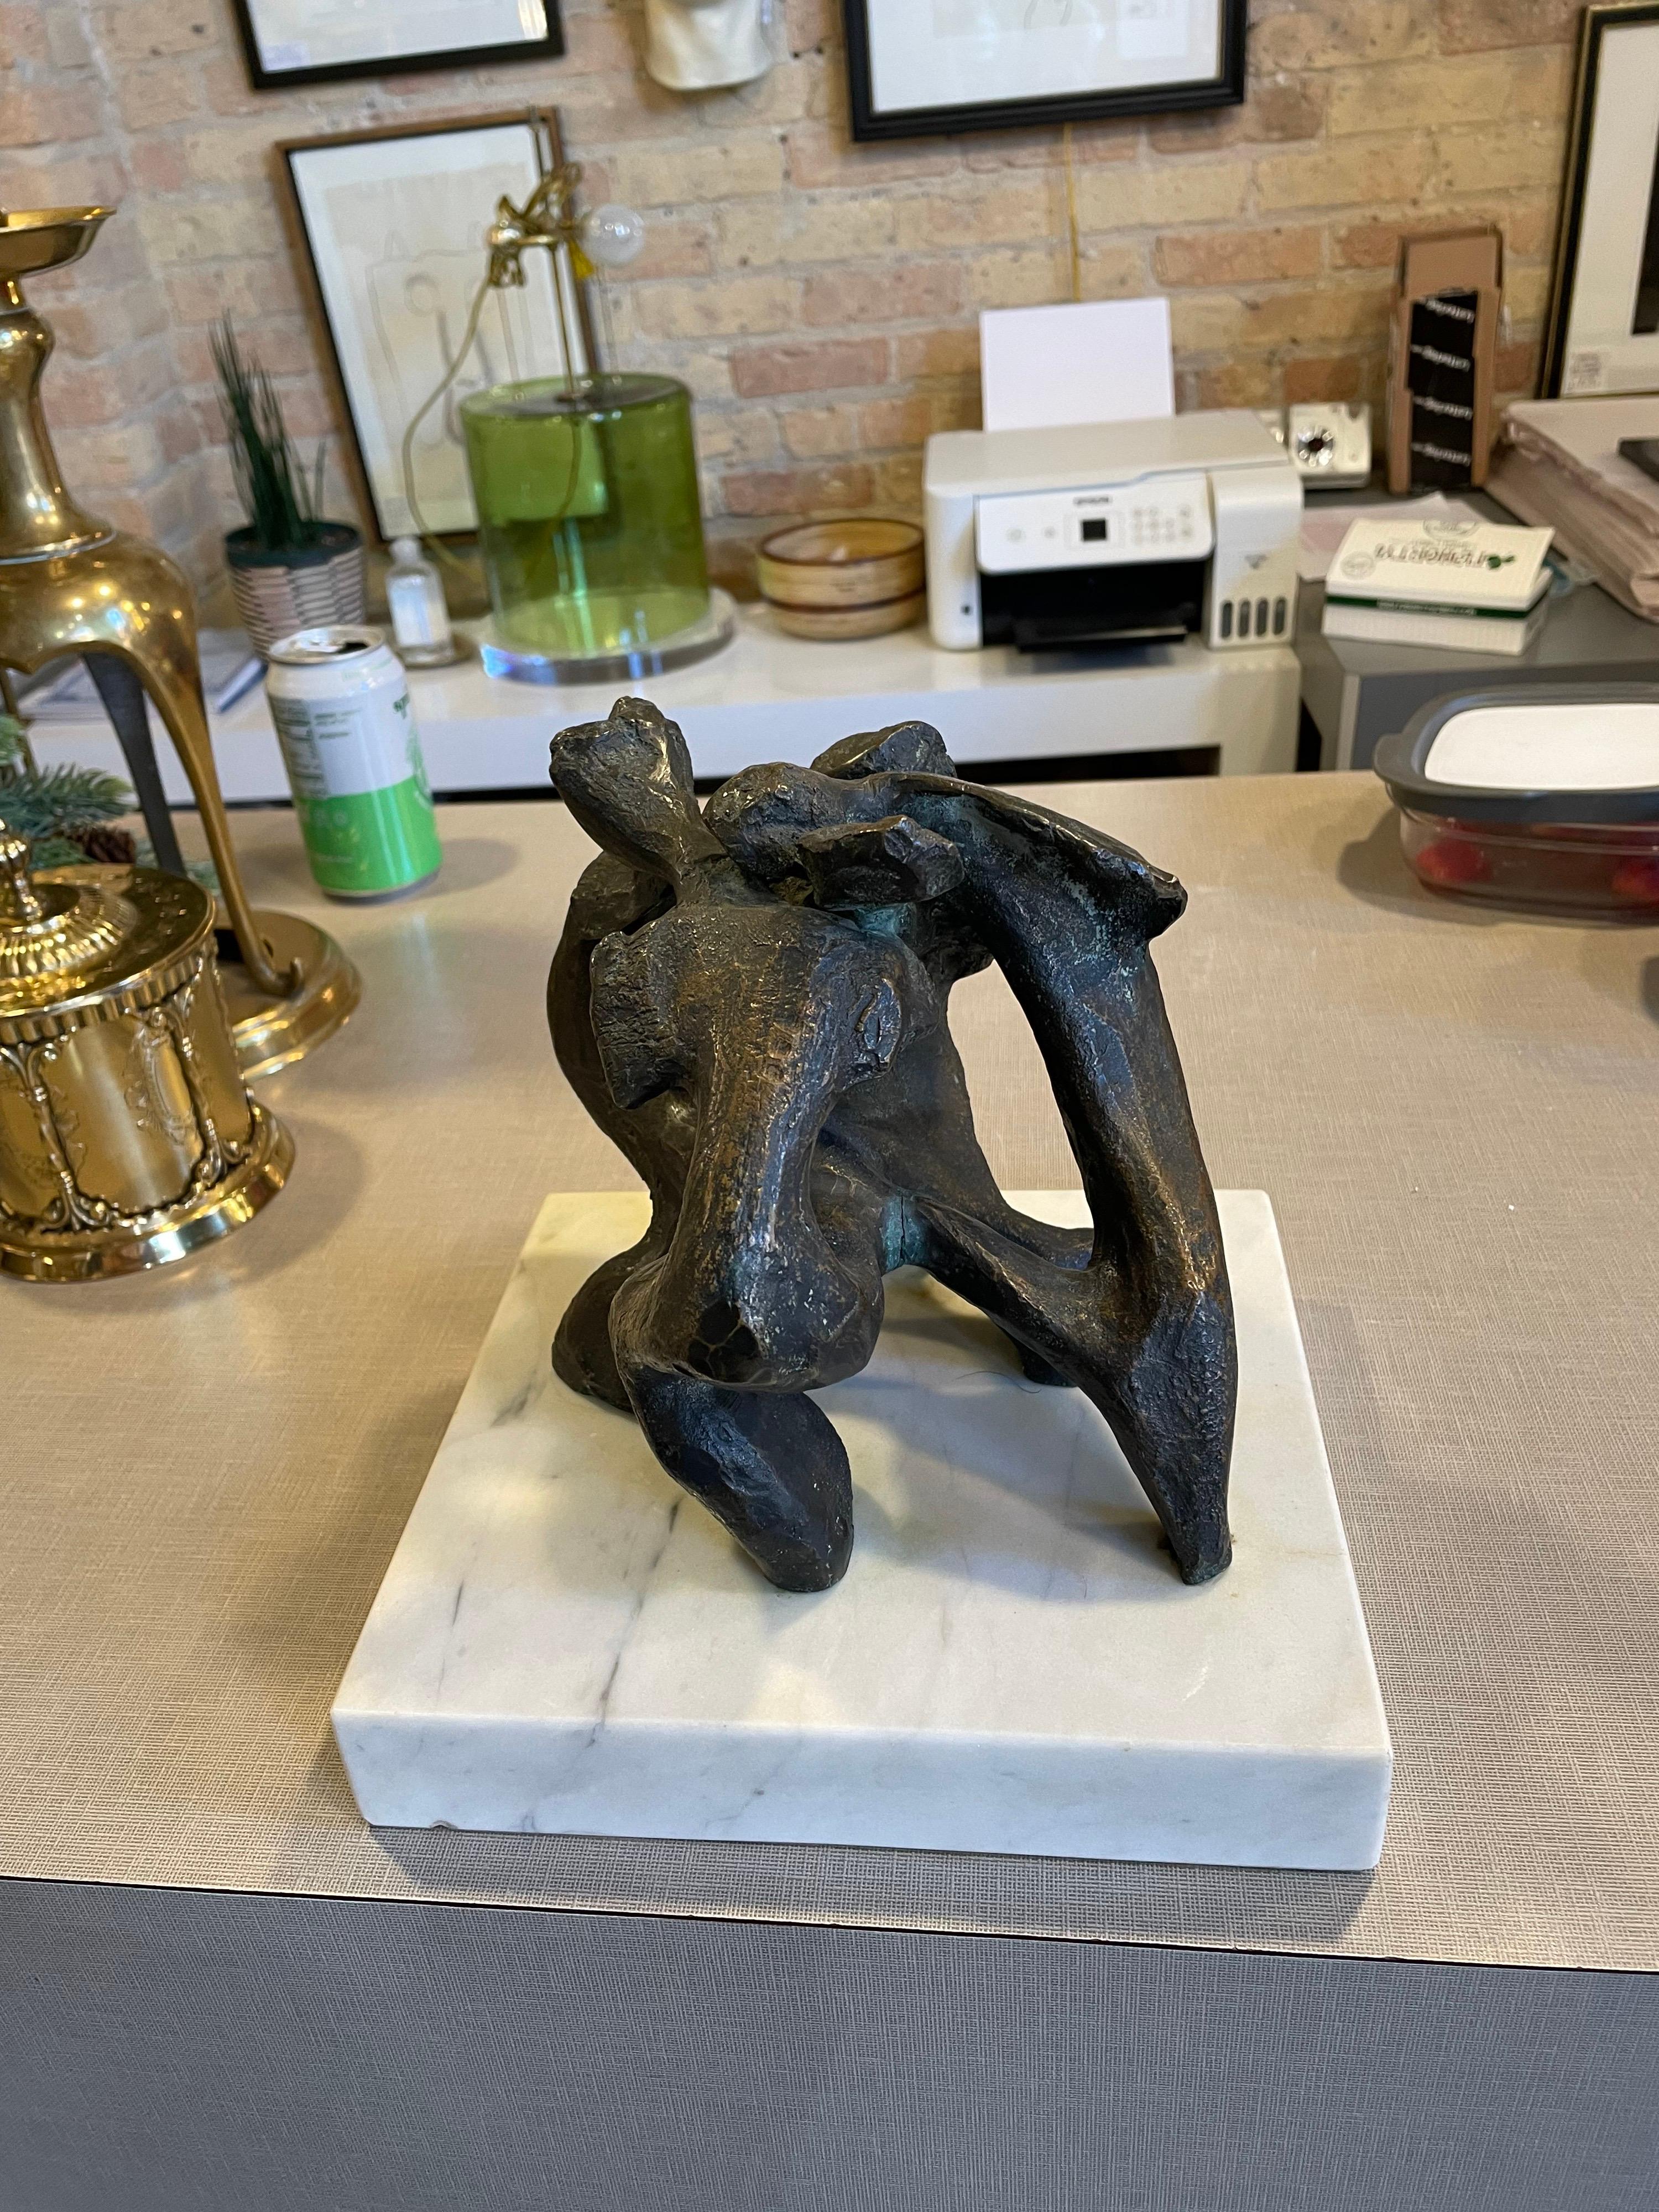 This is a wonderful heavy Bronze figural sculpture on a white marble plynth 
It is unsigned but attributed to the style of Abbott Pattison Chicago born sculptor.